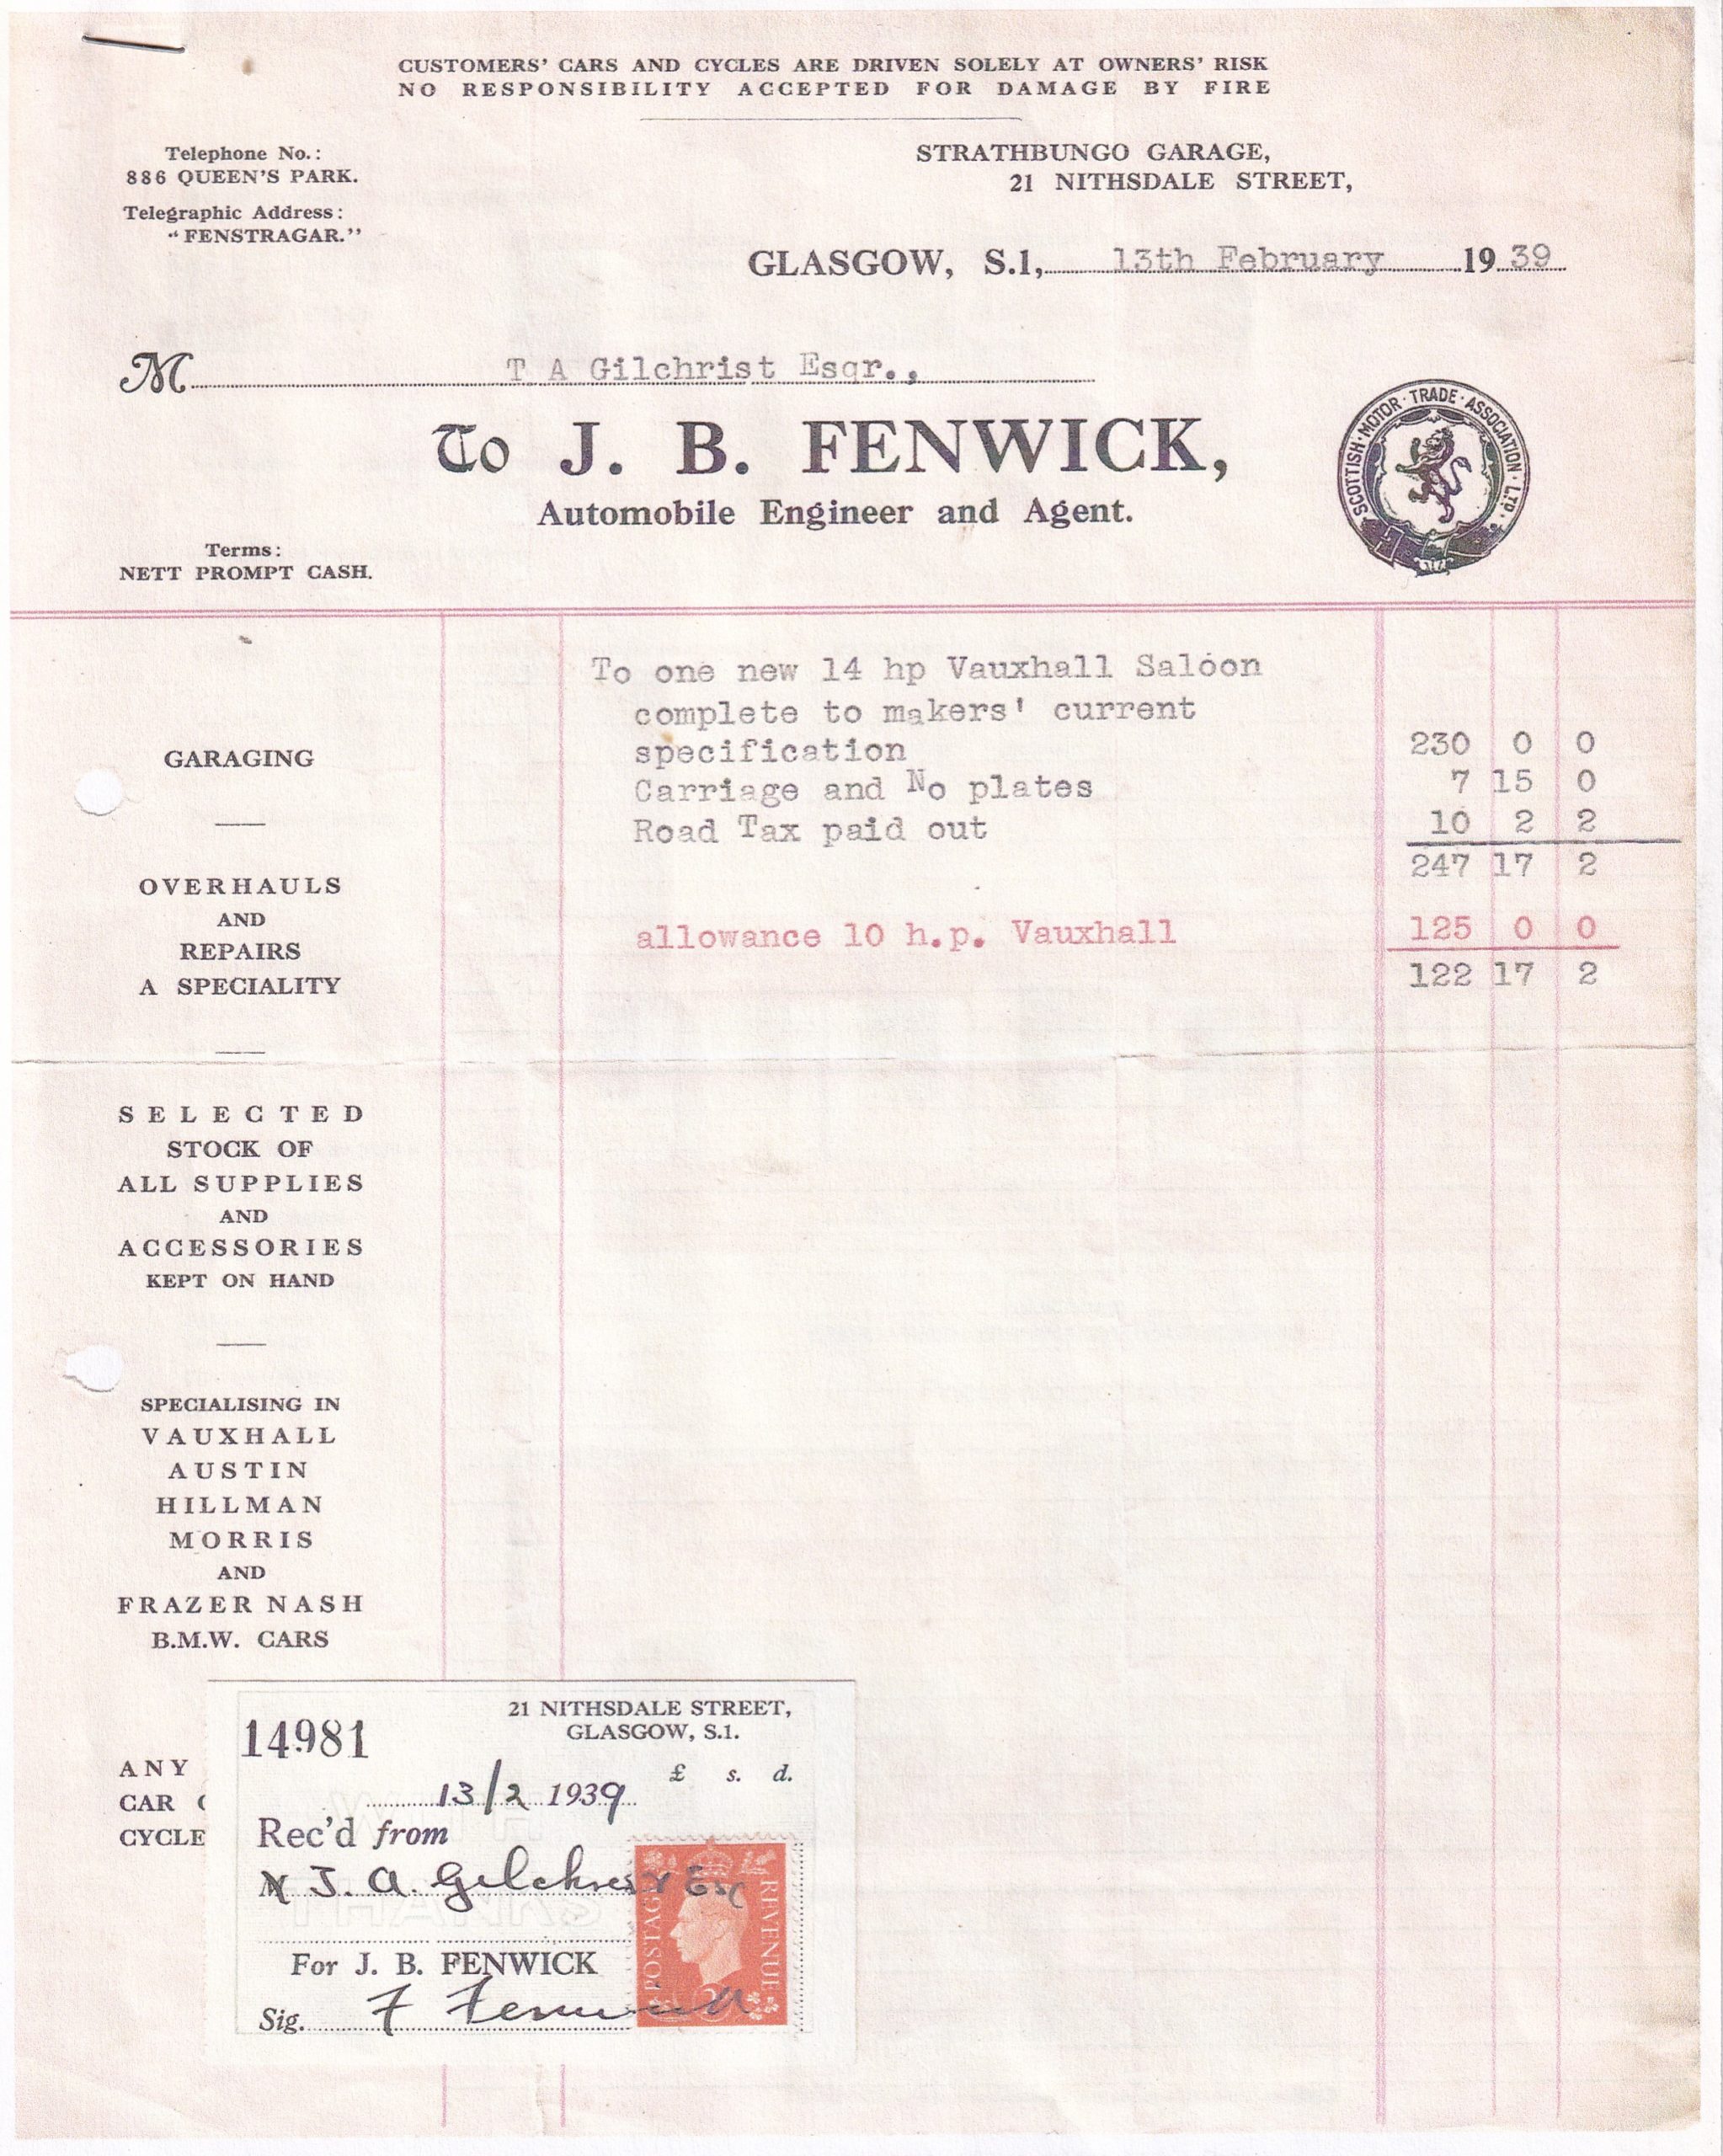 Bill from 1939 - £230 for a new Vauxhall saloon